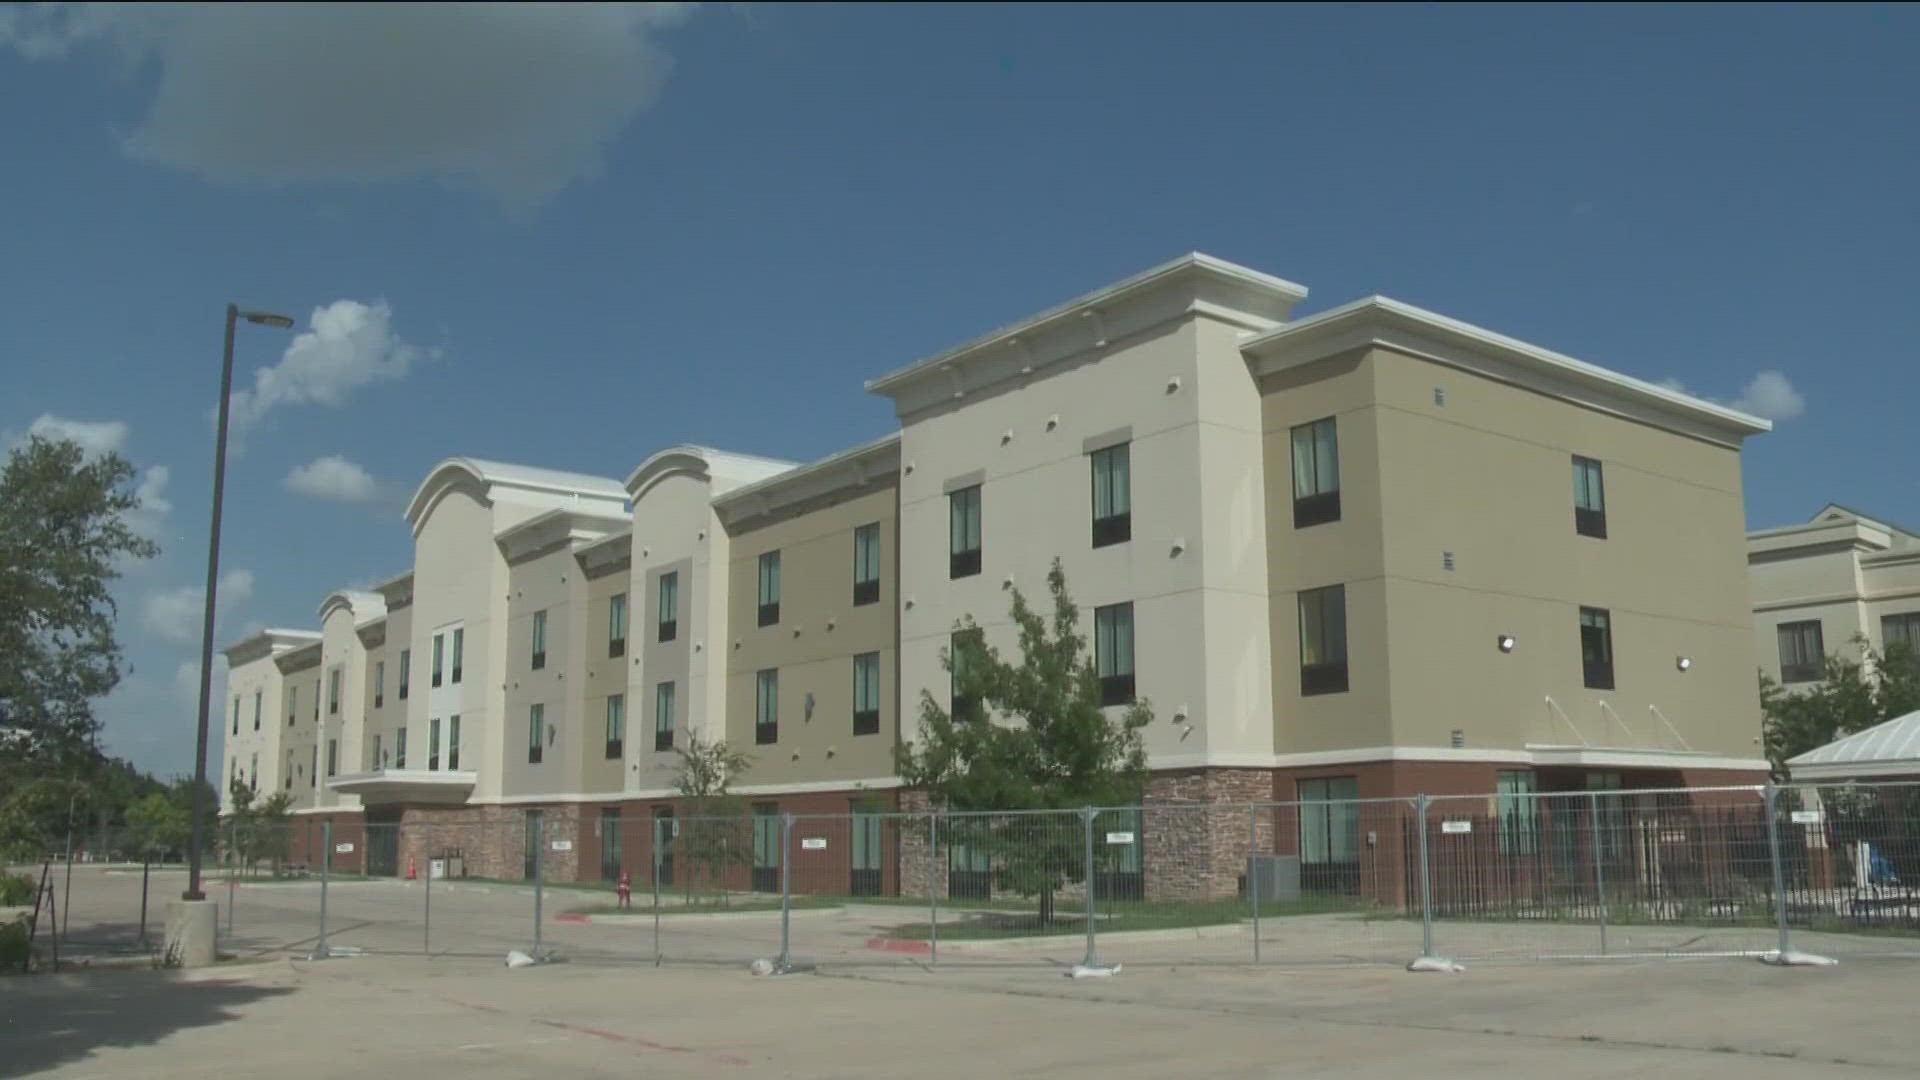 Austin is looking to convert a former Candlewood Suites into supportive housing but is facing pushback from Williamson County.